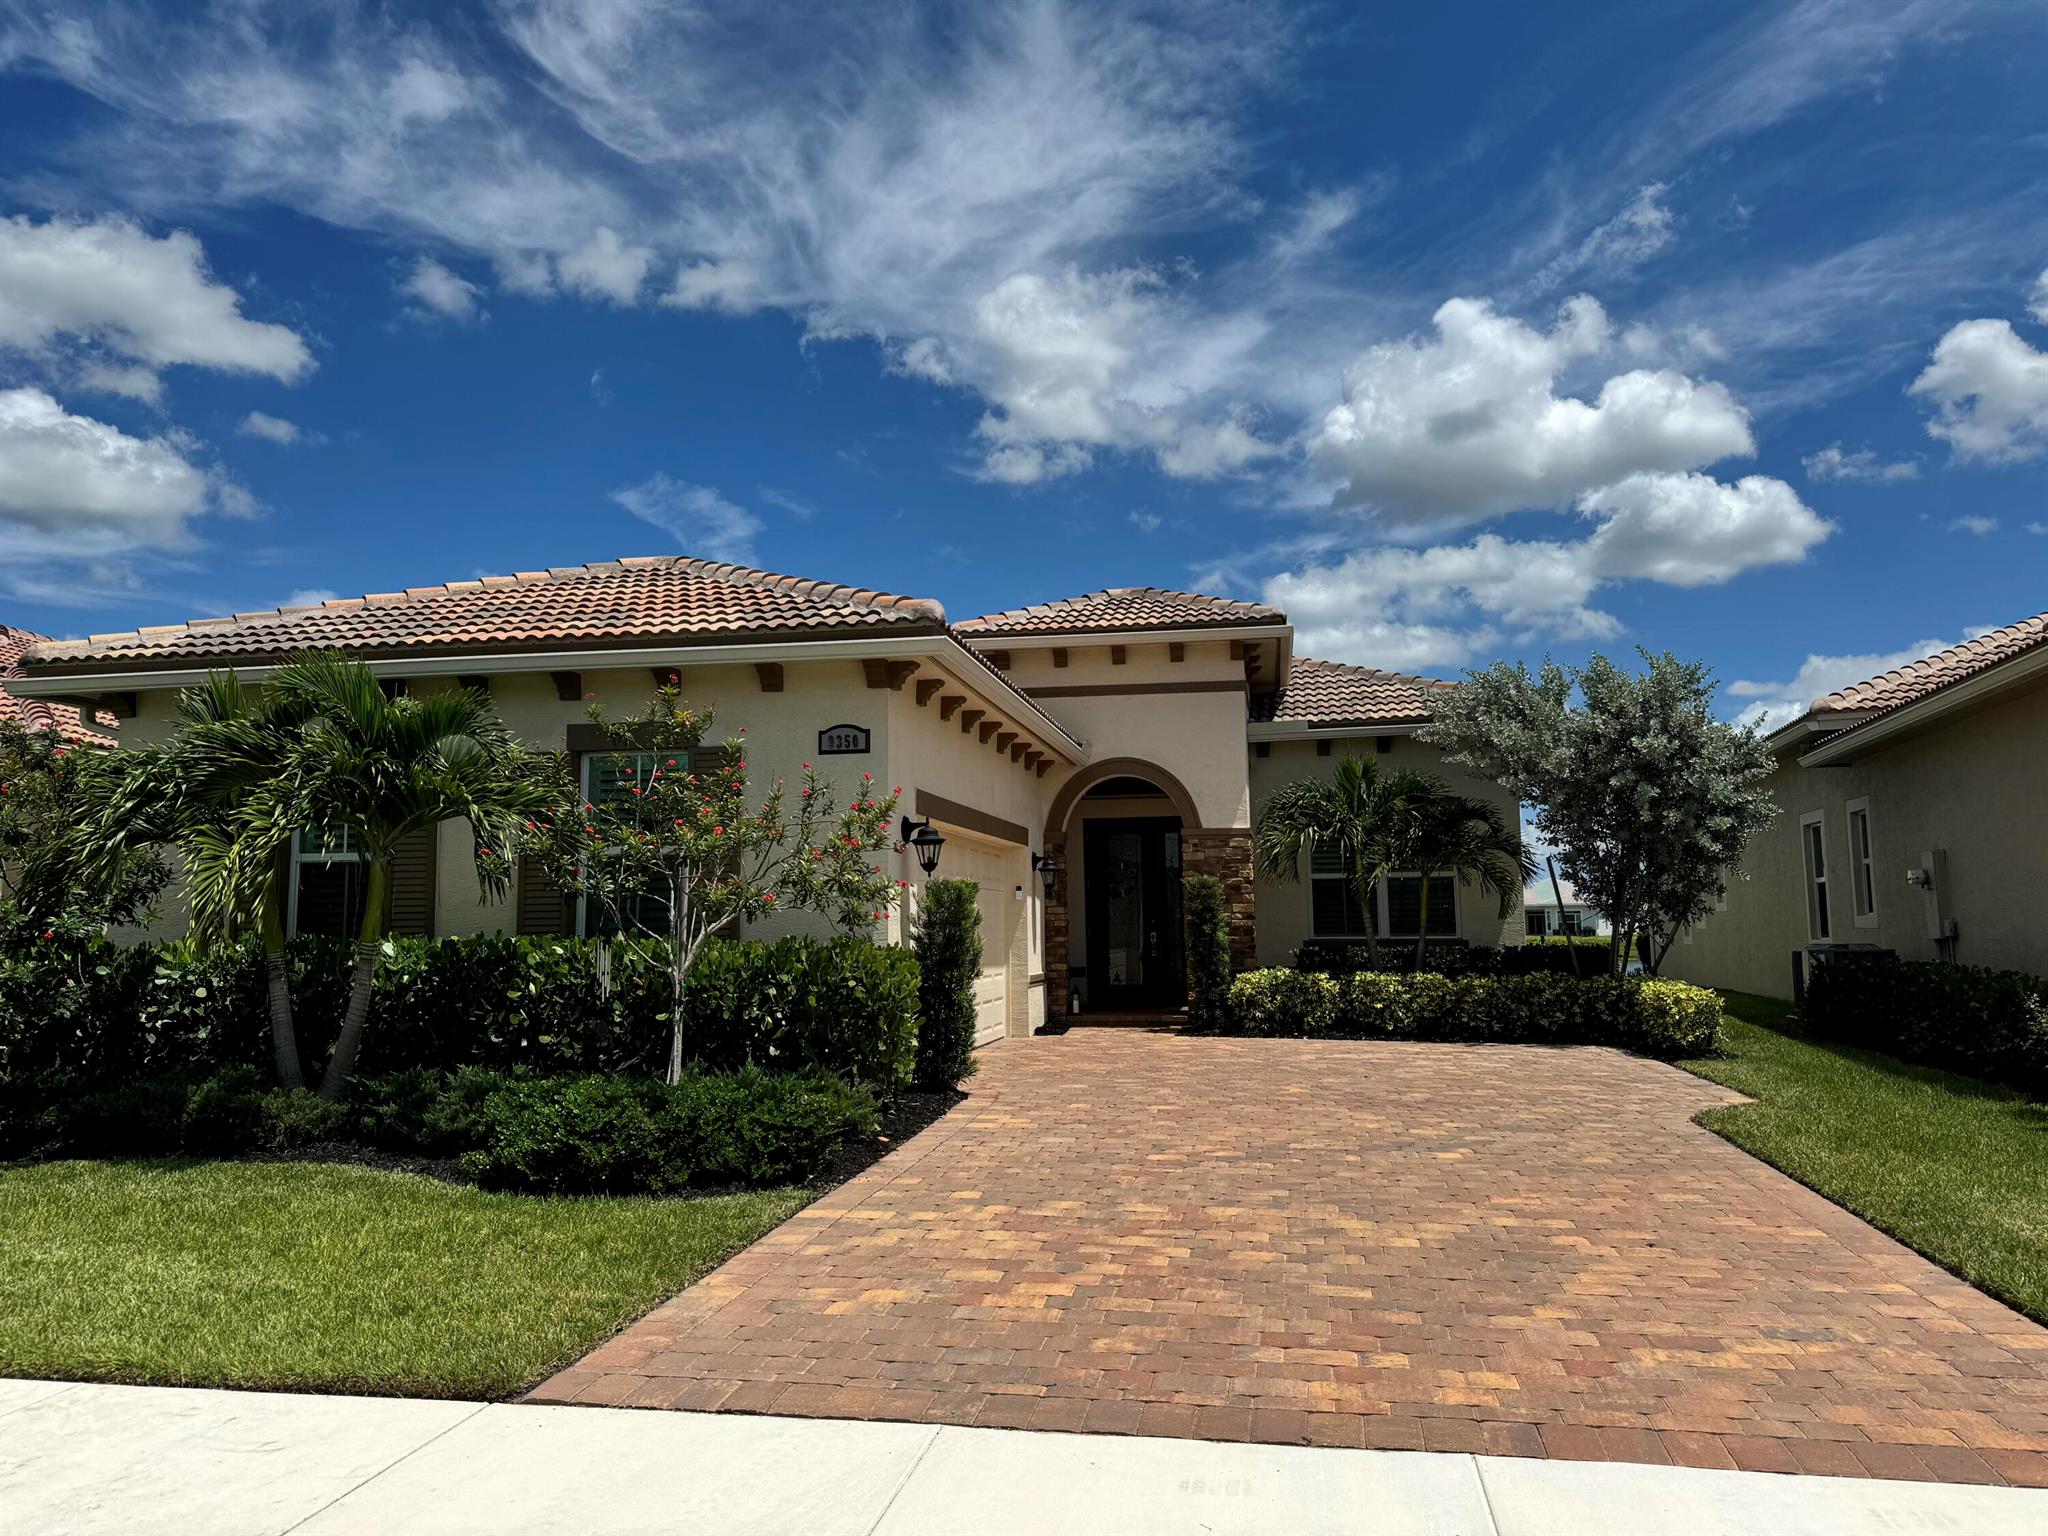 This stunning 2023 Kolter-built Alessa floorplan in PGA Verano, Port St Lucie, offers luxury living at its finest. Boasting 3 bedrooms, 2.5 baths, and a spacious 3-car garage, this lakefront gem features a fenced backyard with NE exposure, perfect for enjoying serene water views. Built for durability with CBS construction, impact windows and doors, and a concrete tile roof, this home ensures safety and low insurance rates. The chef-style kitchen is a culinary delight with a wall oven, chimney hood, and cooktop. Enjoy resort-style amenities and proximity to the 54-hole PGA Golf Club in this exclusive community. Your perfect blend of elegance and functionality awaits! Situated adjacent to the renowned 54-hole PGA Golf Club